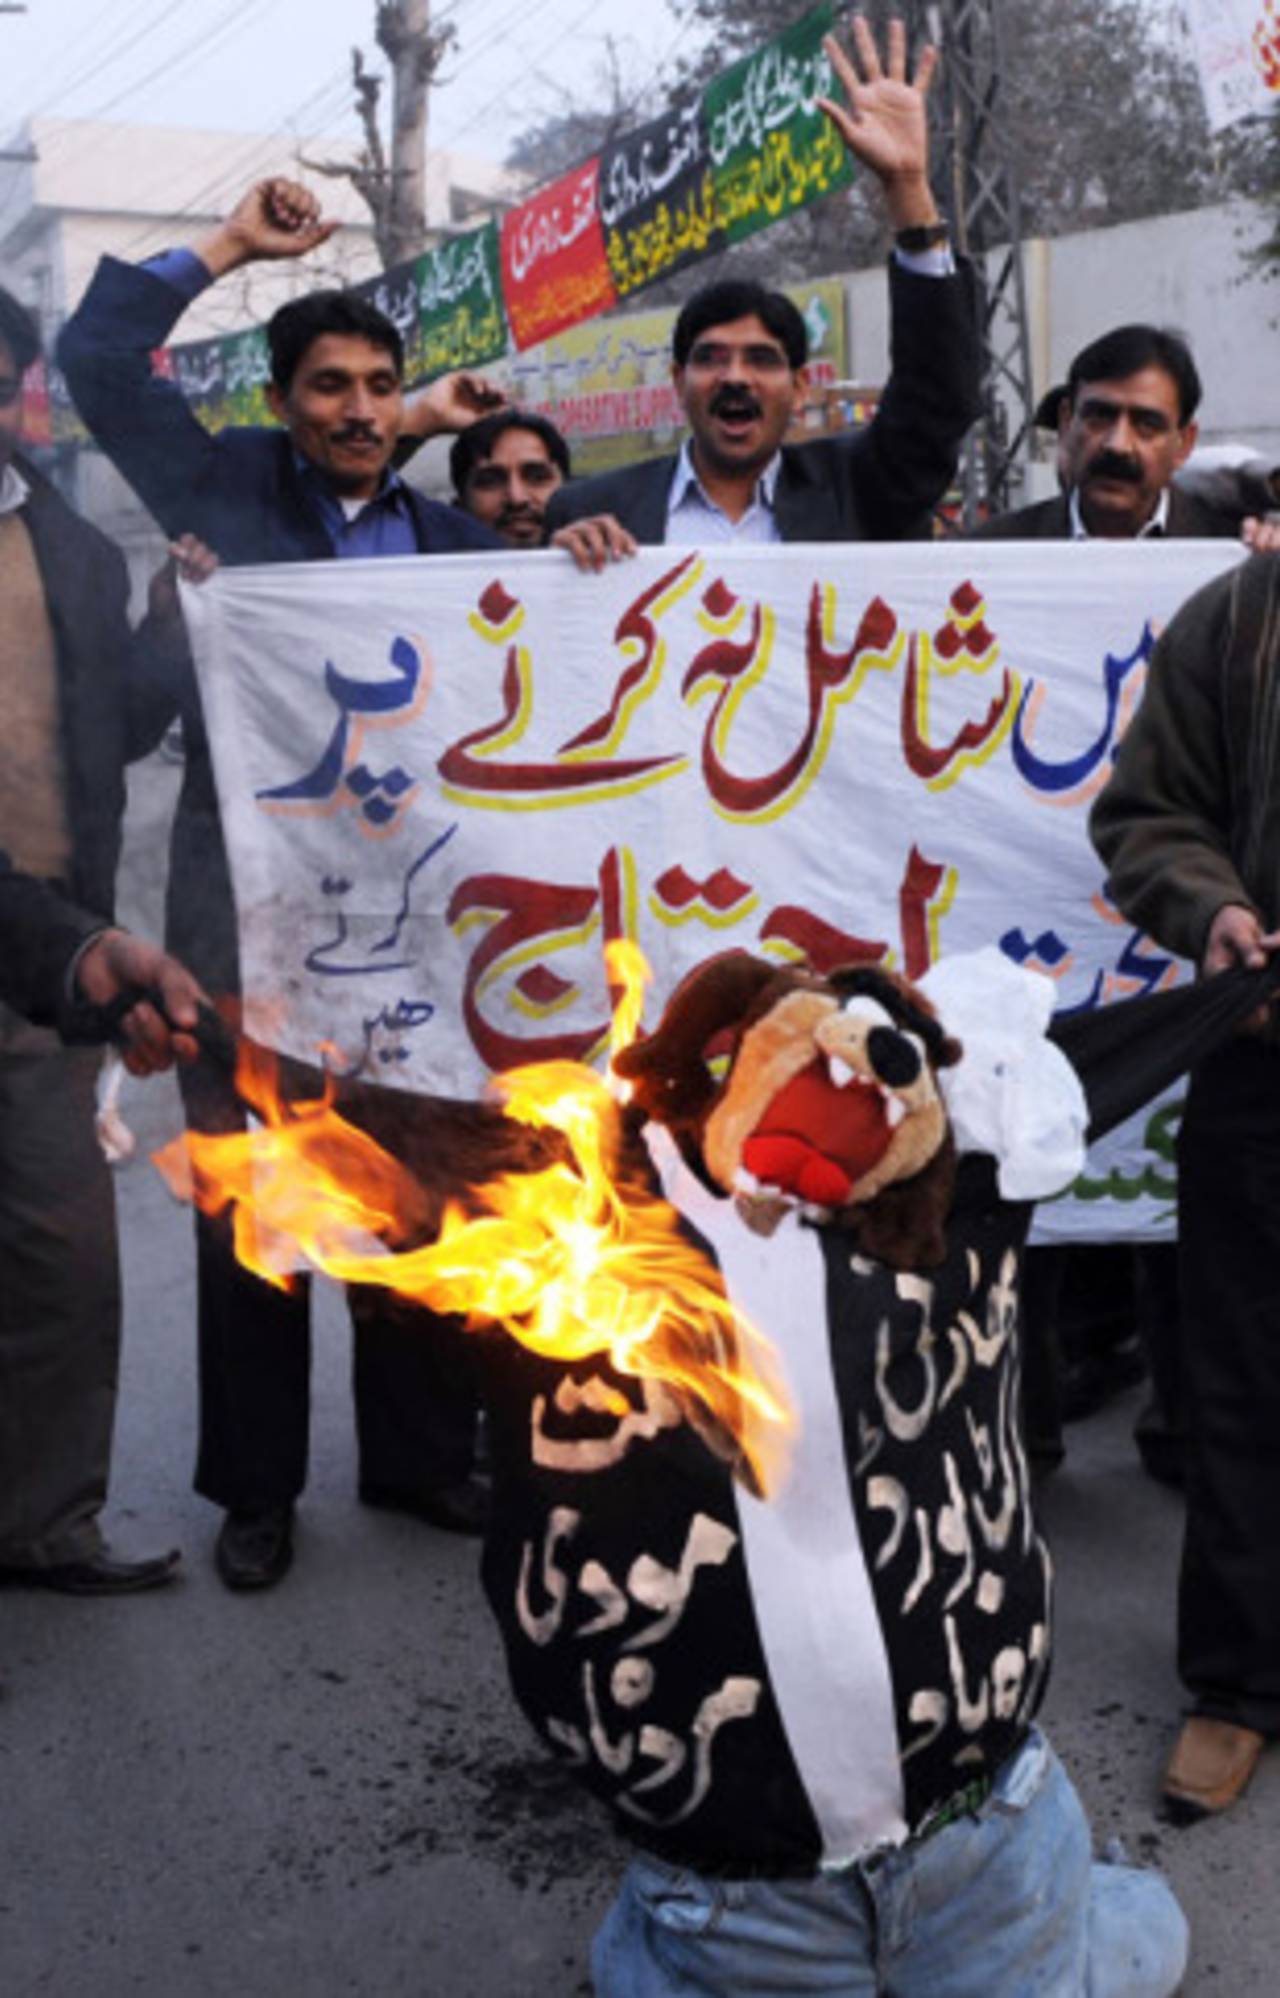 Pakistan cricket fans burn effigies symbolising the IPL, a reflection of the public anger after their cricketers were snubbed at the auction&nbsp;&nbsp;&bull;&nbsp;&nbsp;Getty Images